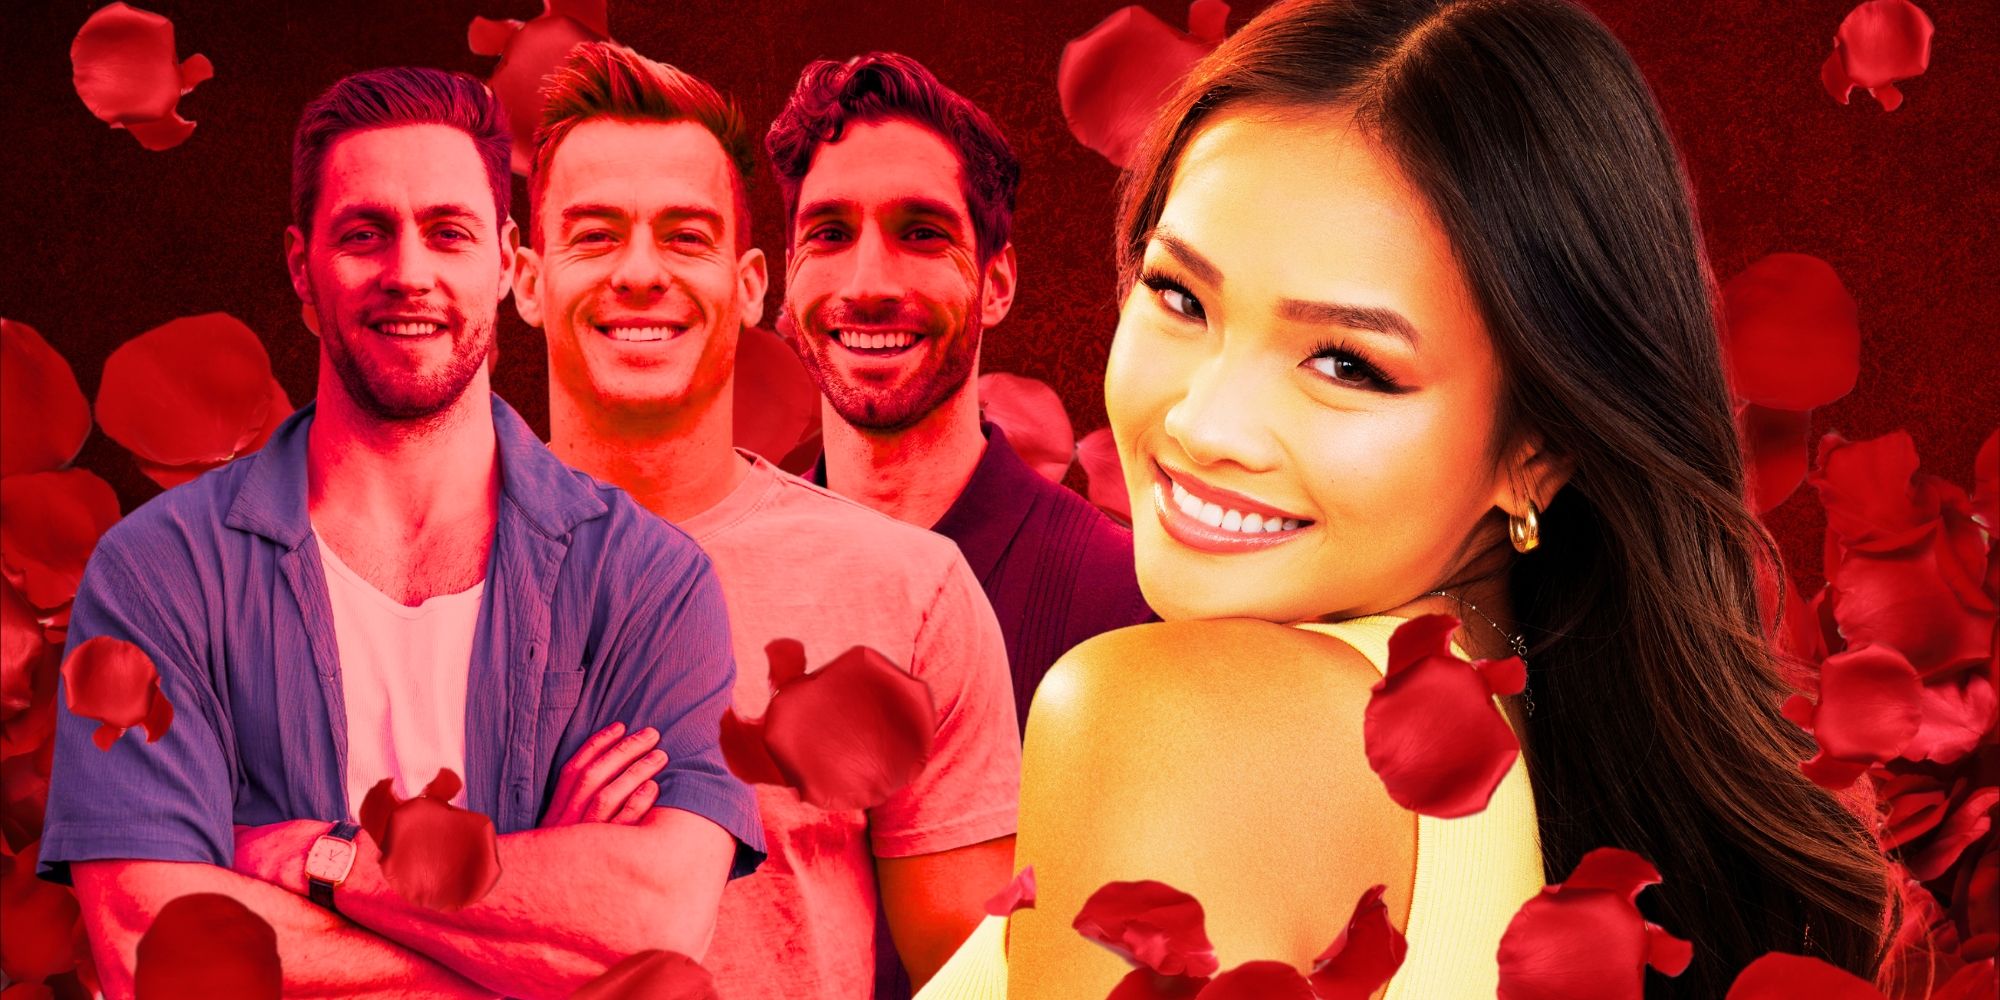 The Bachelorette's Jenn Tran, with three of her potential suitors, surrounded by rose petals